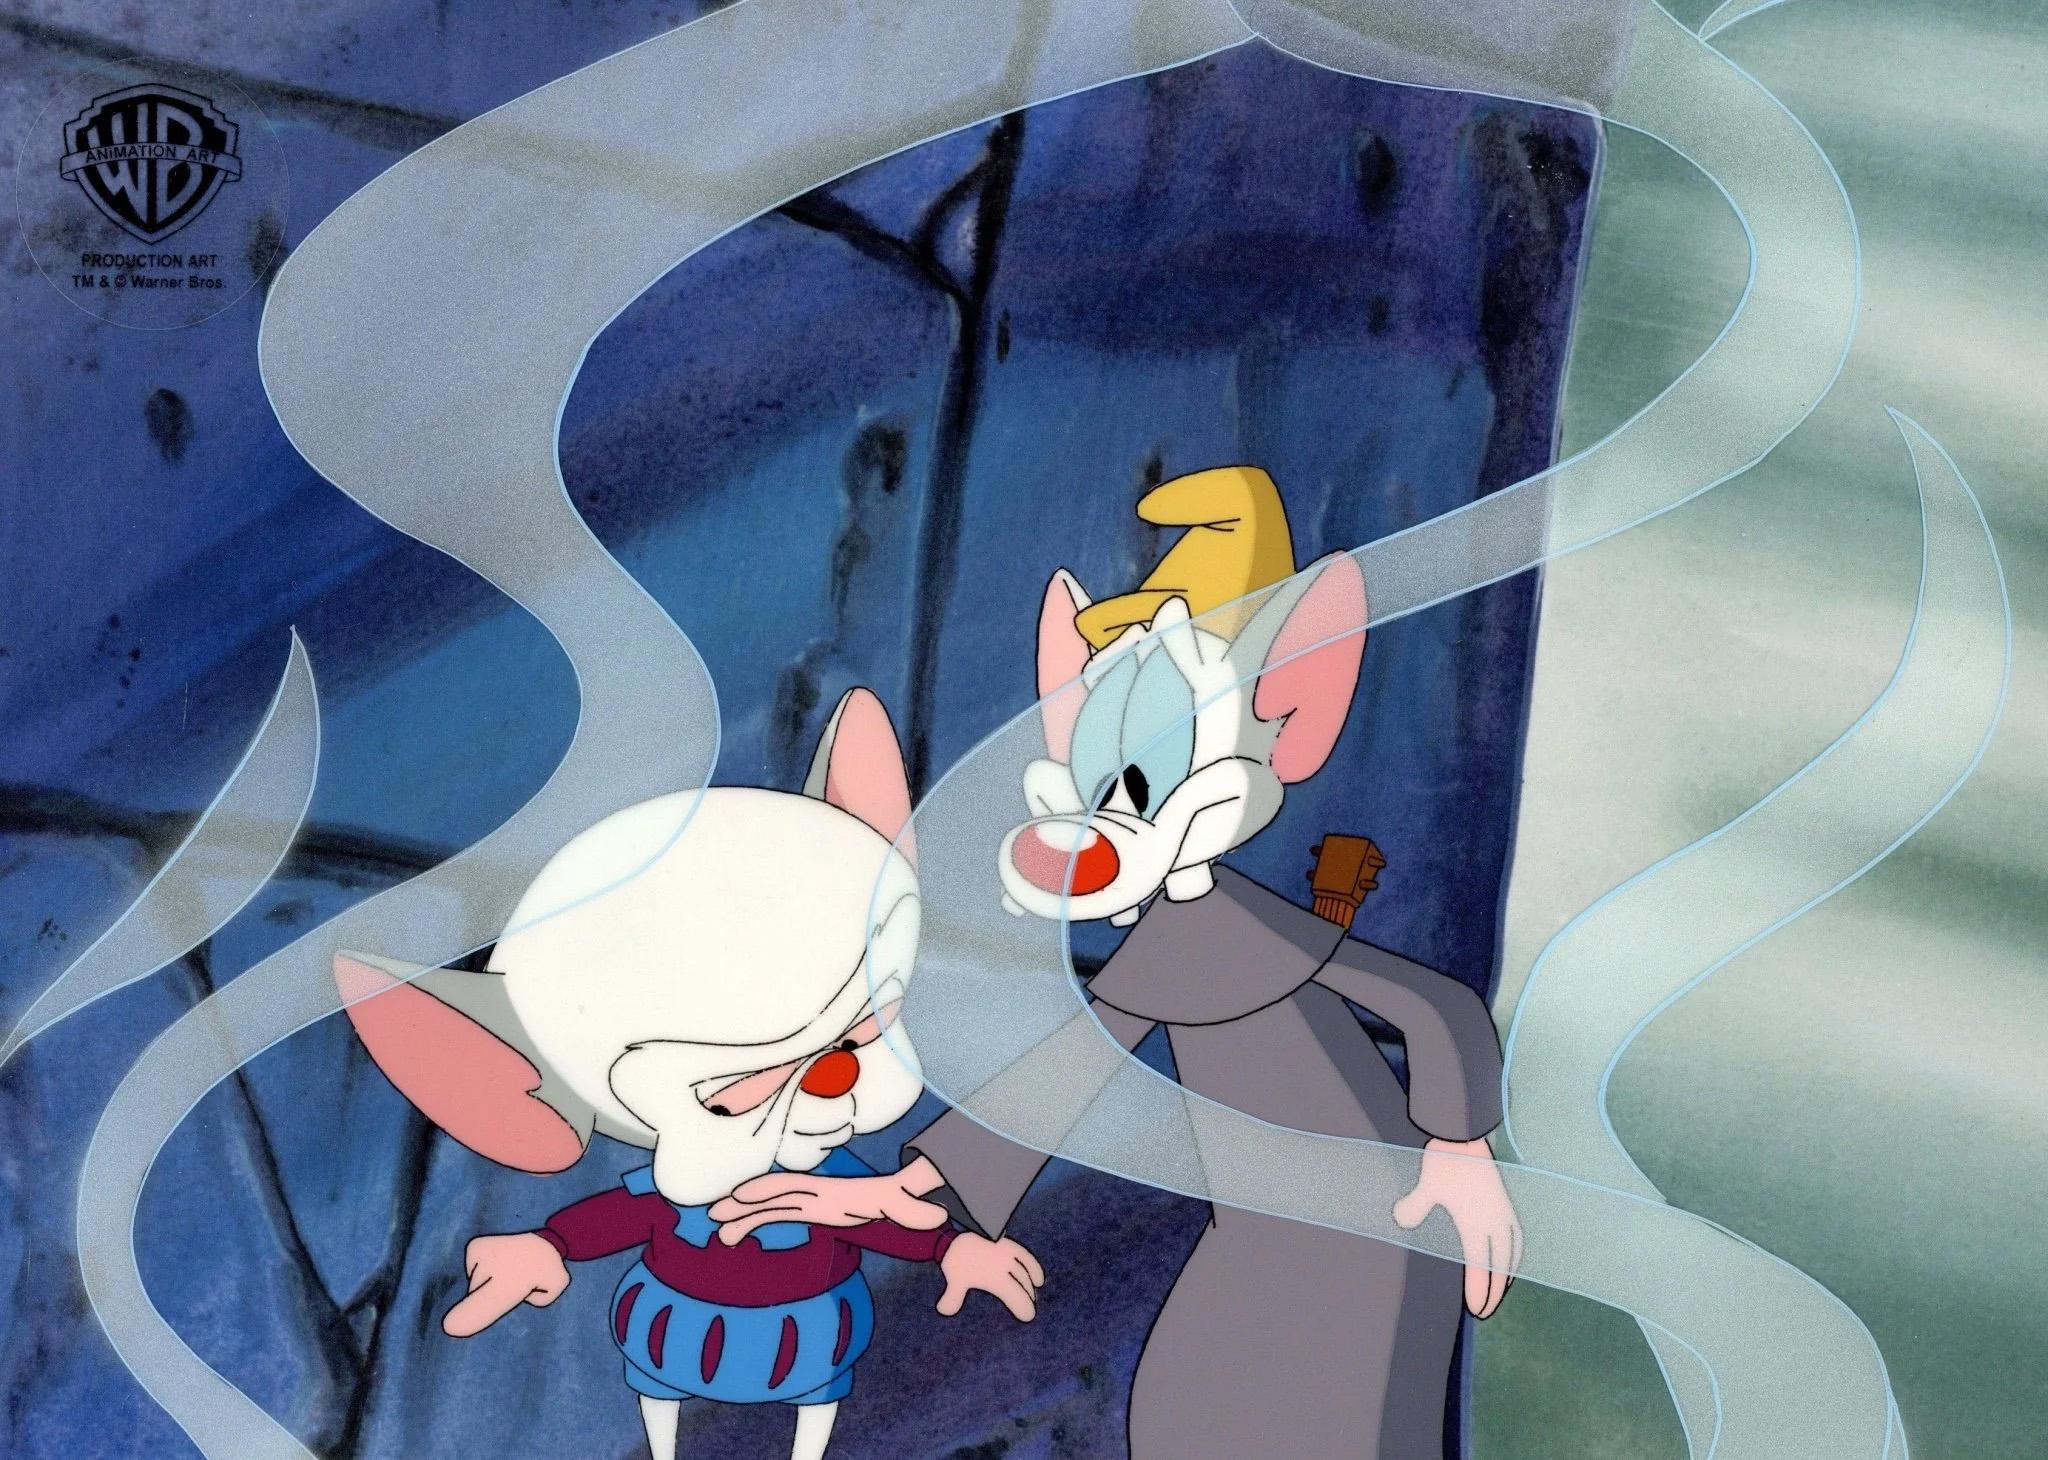 Pinky And The Brain Original Production Cel: Pinky and Brain - Art by Warner Bros. Studio Artists